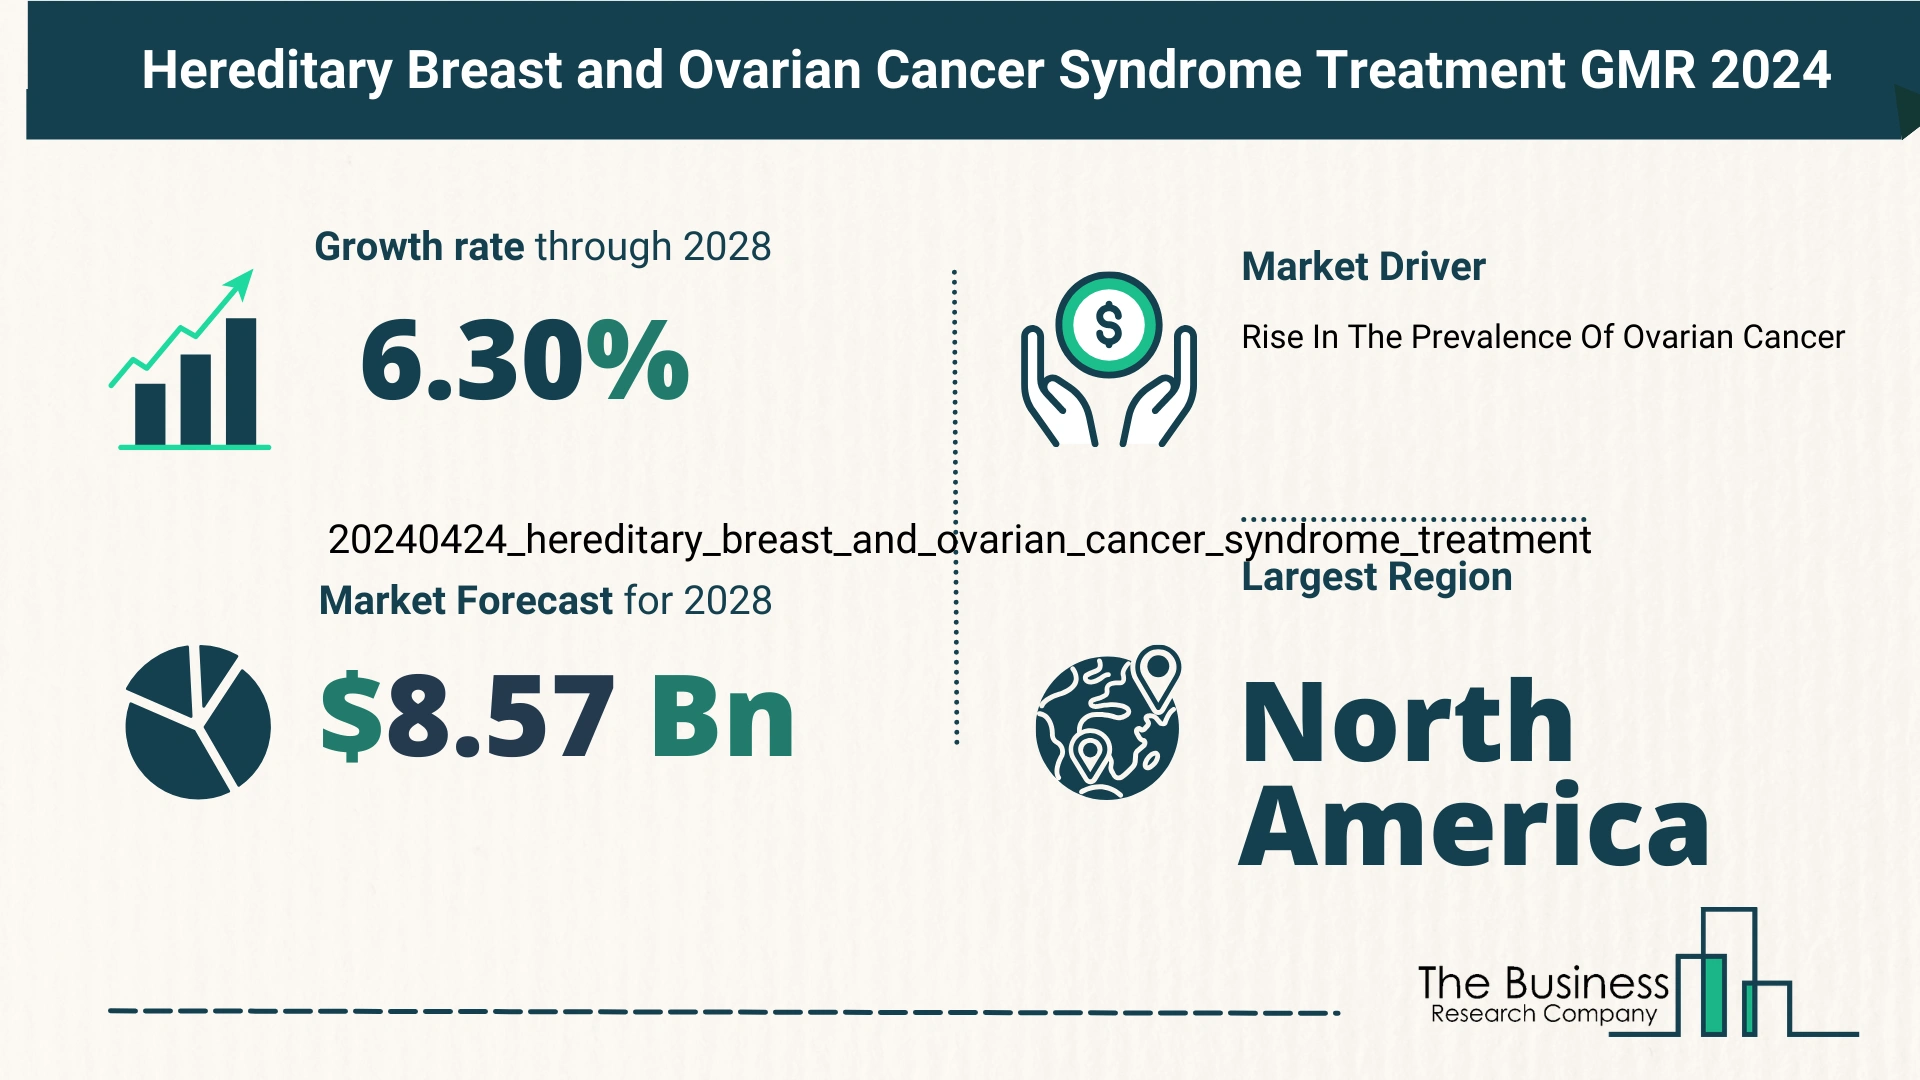 5 Key Insights On The Hereditary Breast and Ovarian Cancer Syndrome Treatment Market 2024